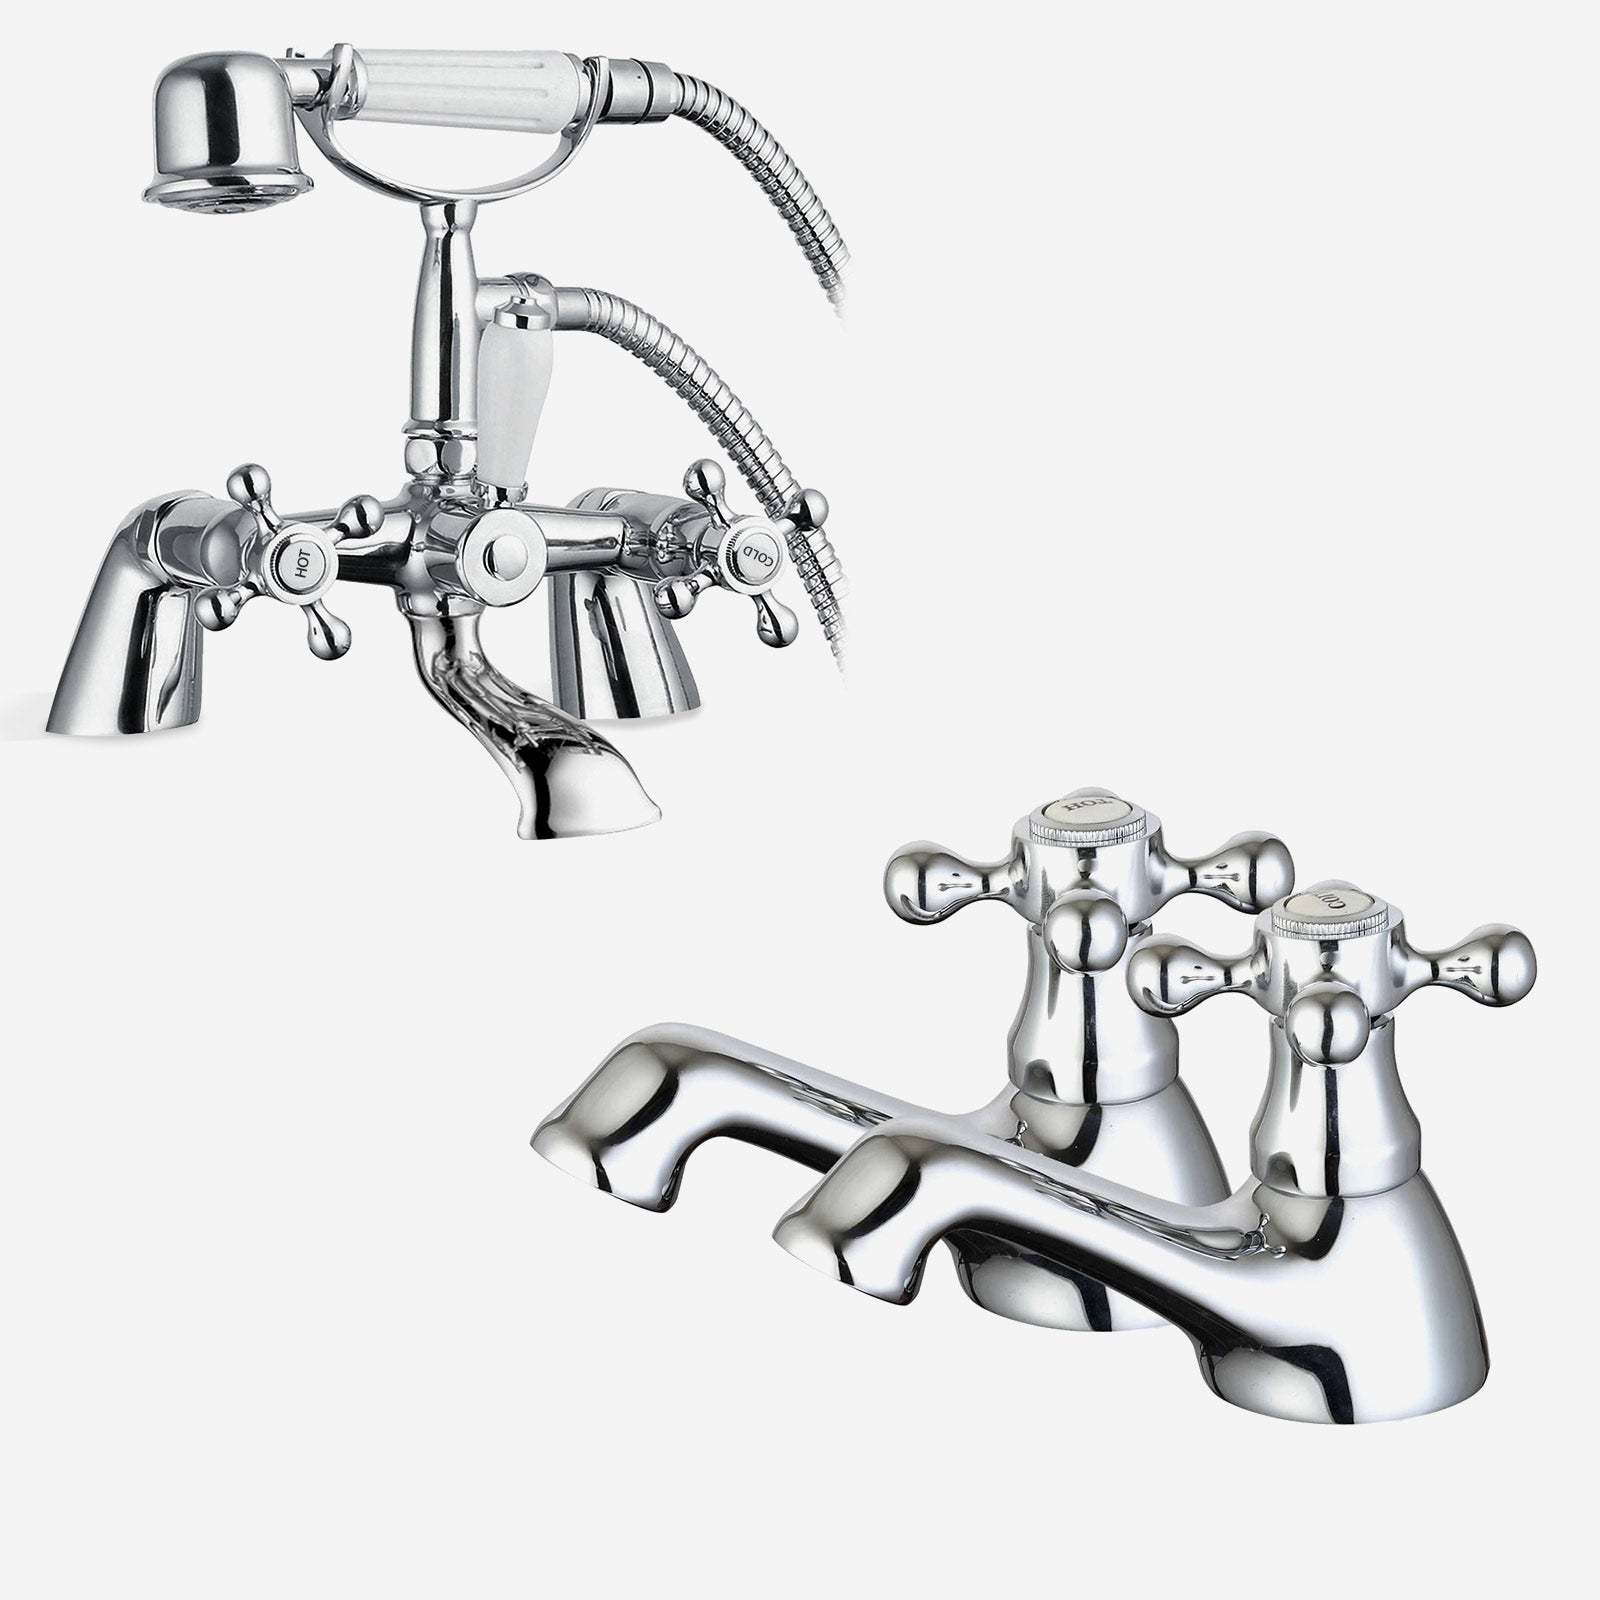 Stafford Victorian Set Of Hot & Cold Basin Taps And Bath Shower Mixer Tap With Handheld Kit